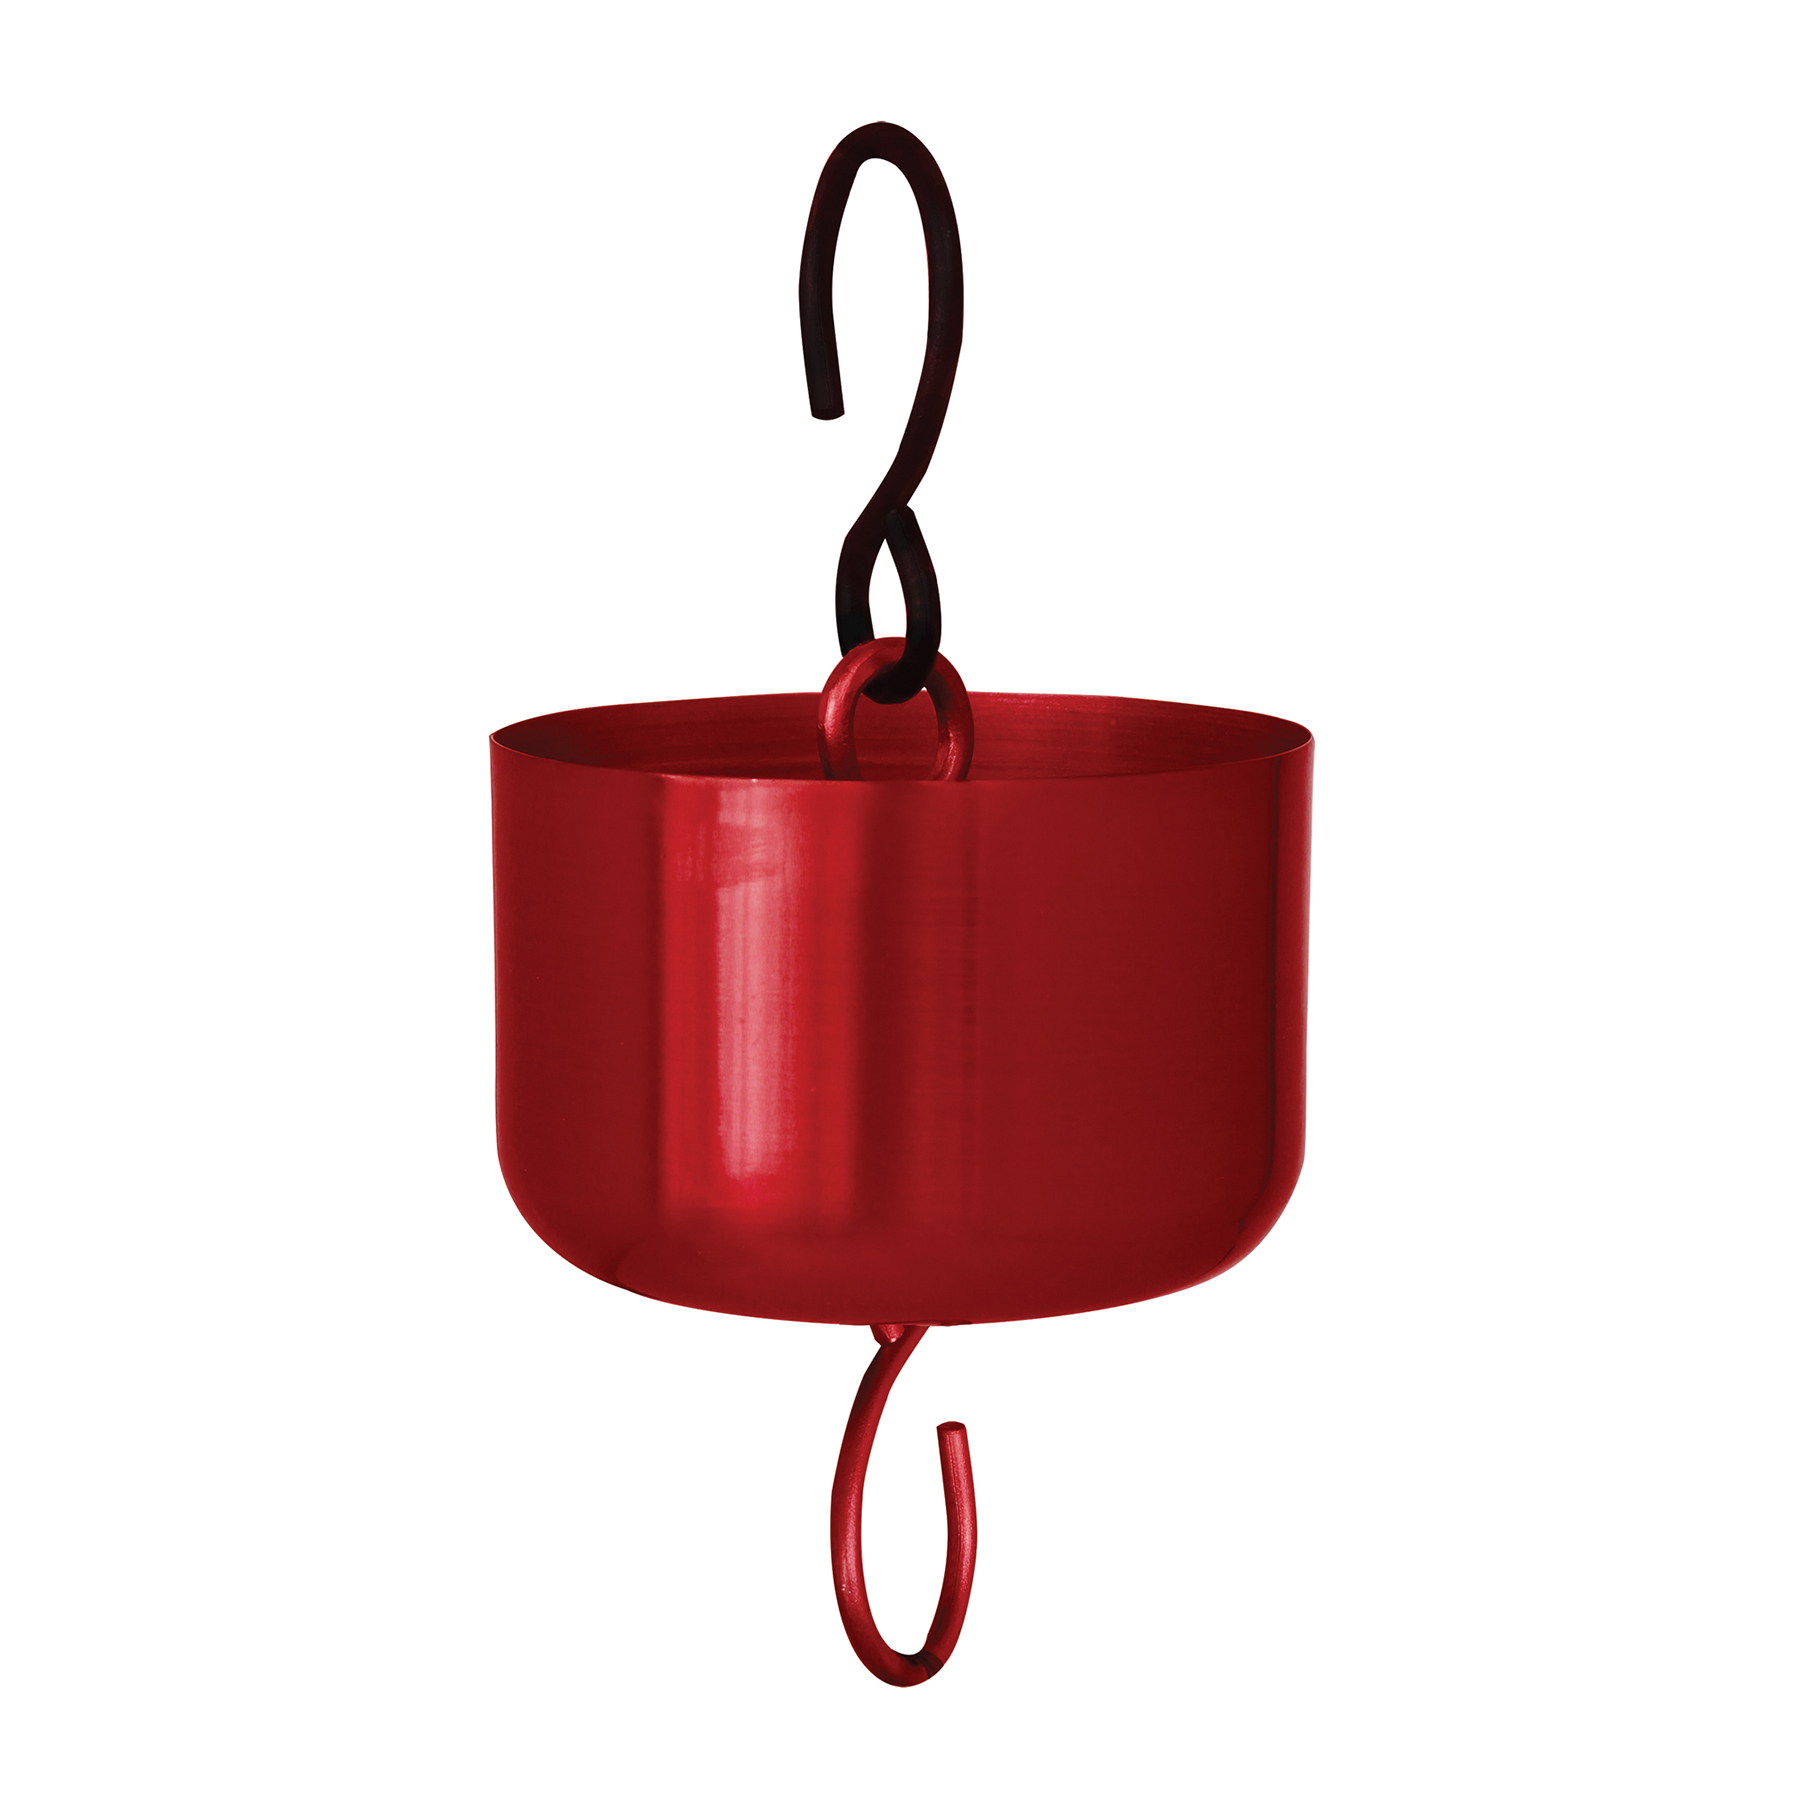 A round red container with a hook on the top and bottom of it. 